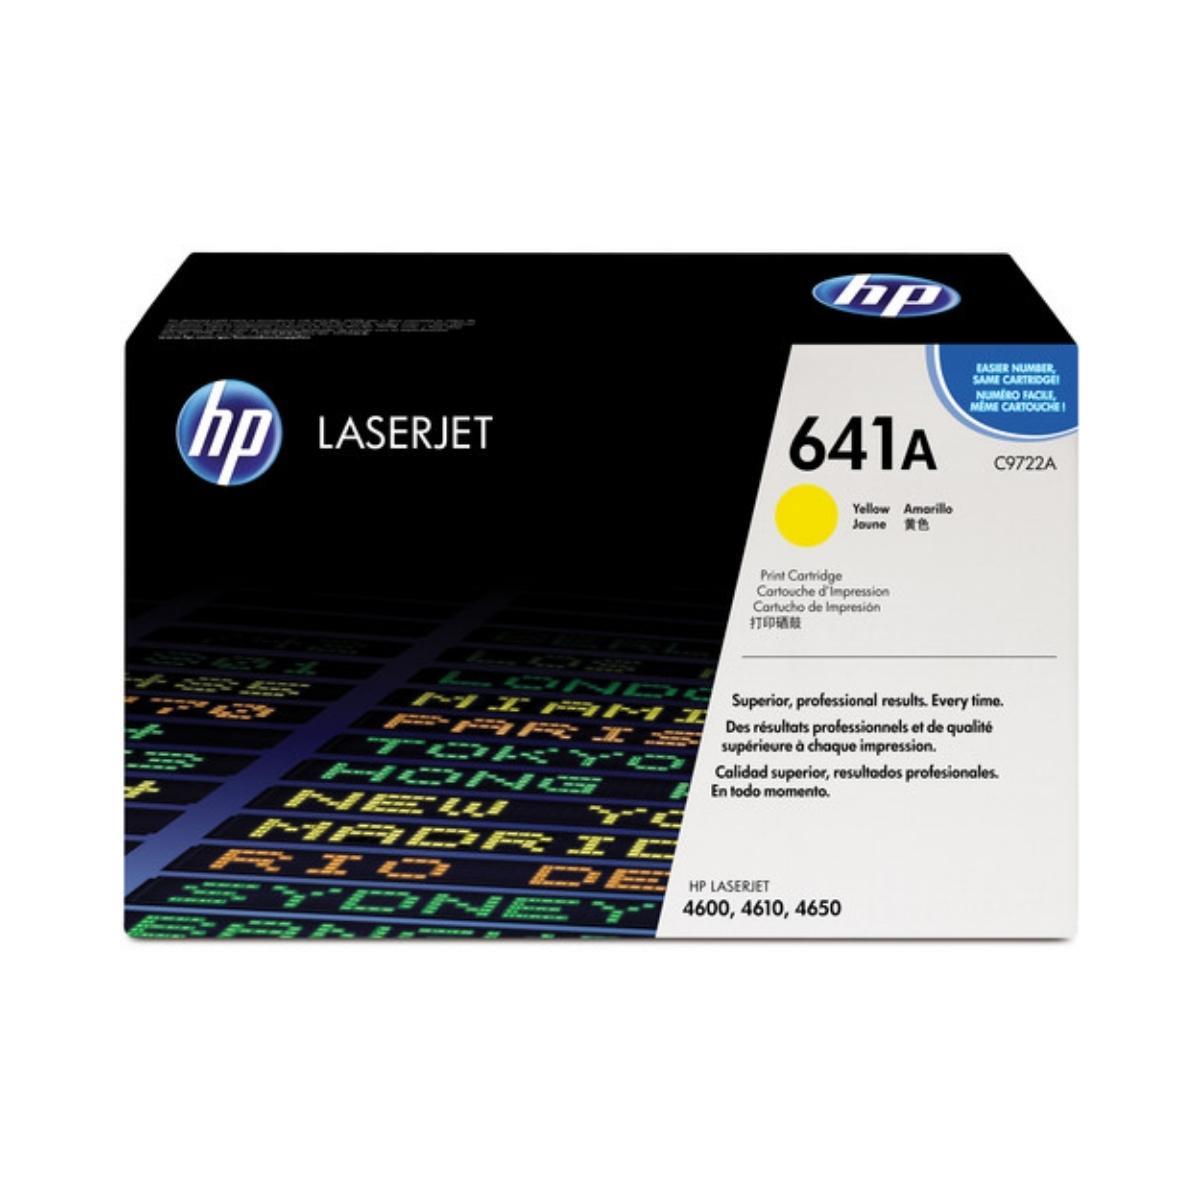 Image of HP C9722A Yellow Cartridge for Color LaserJet Printers